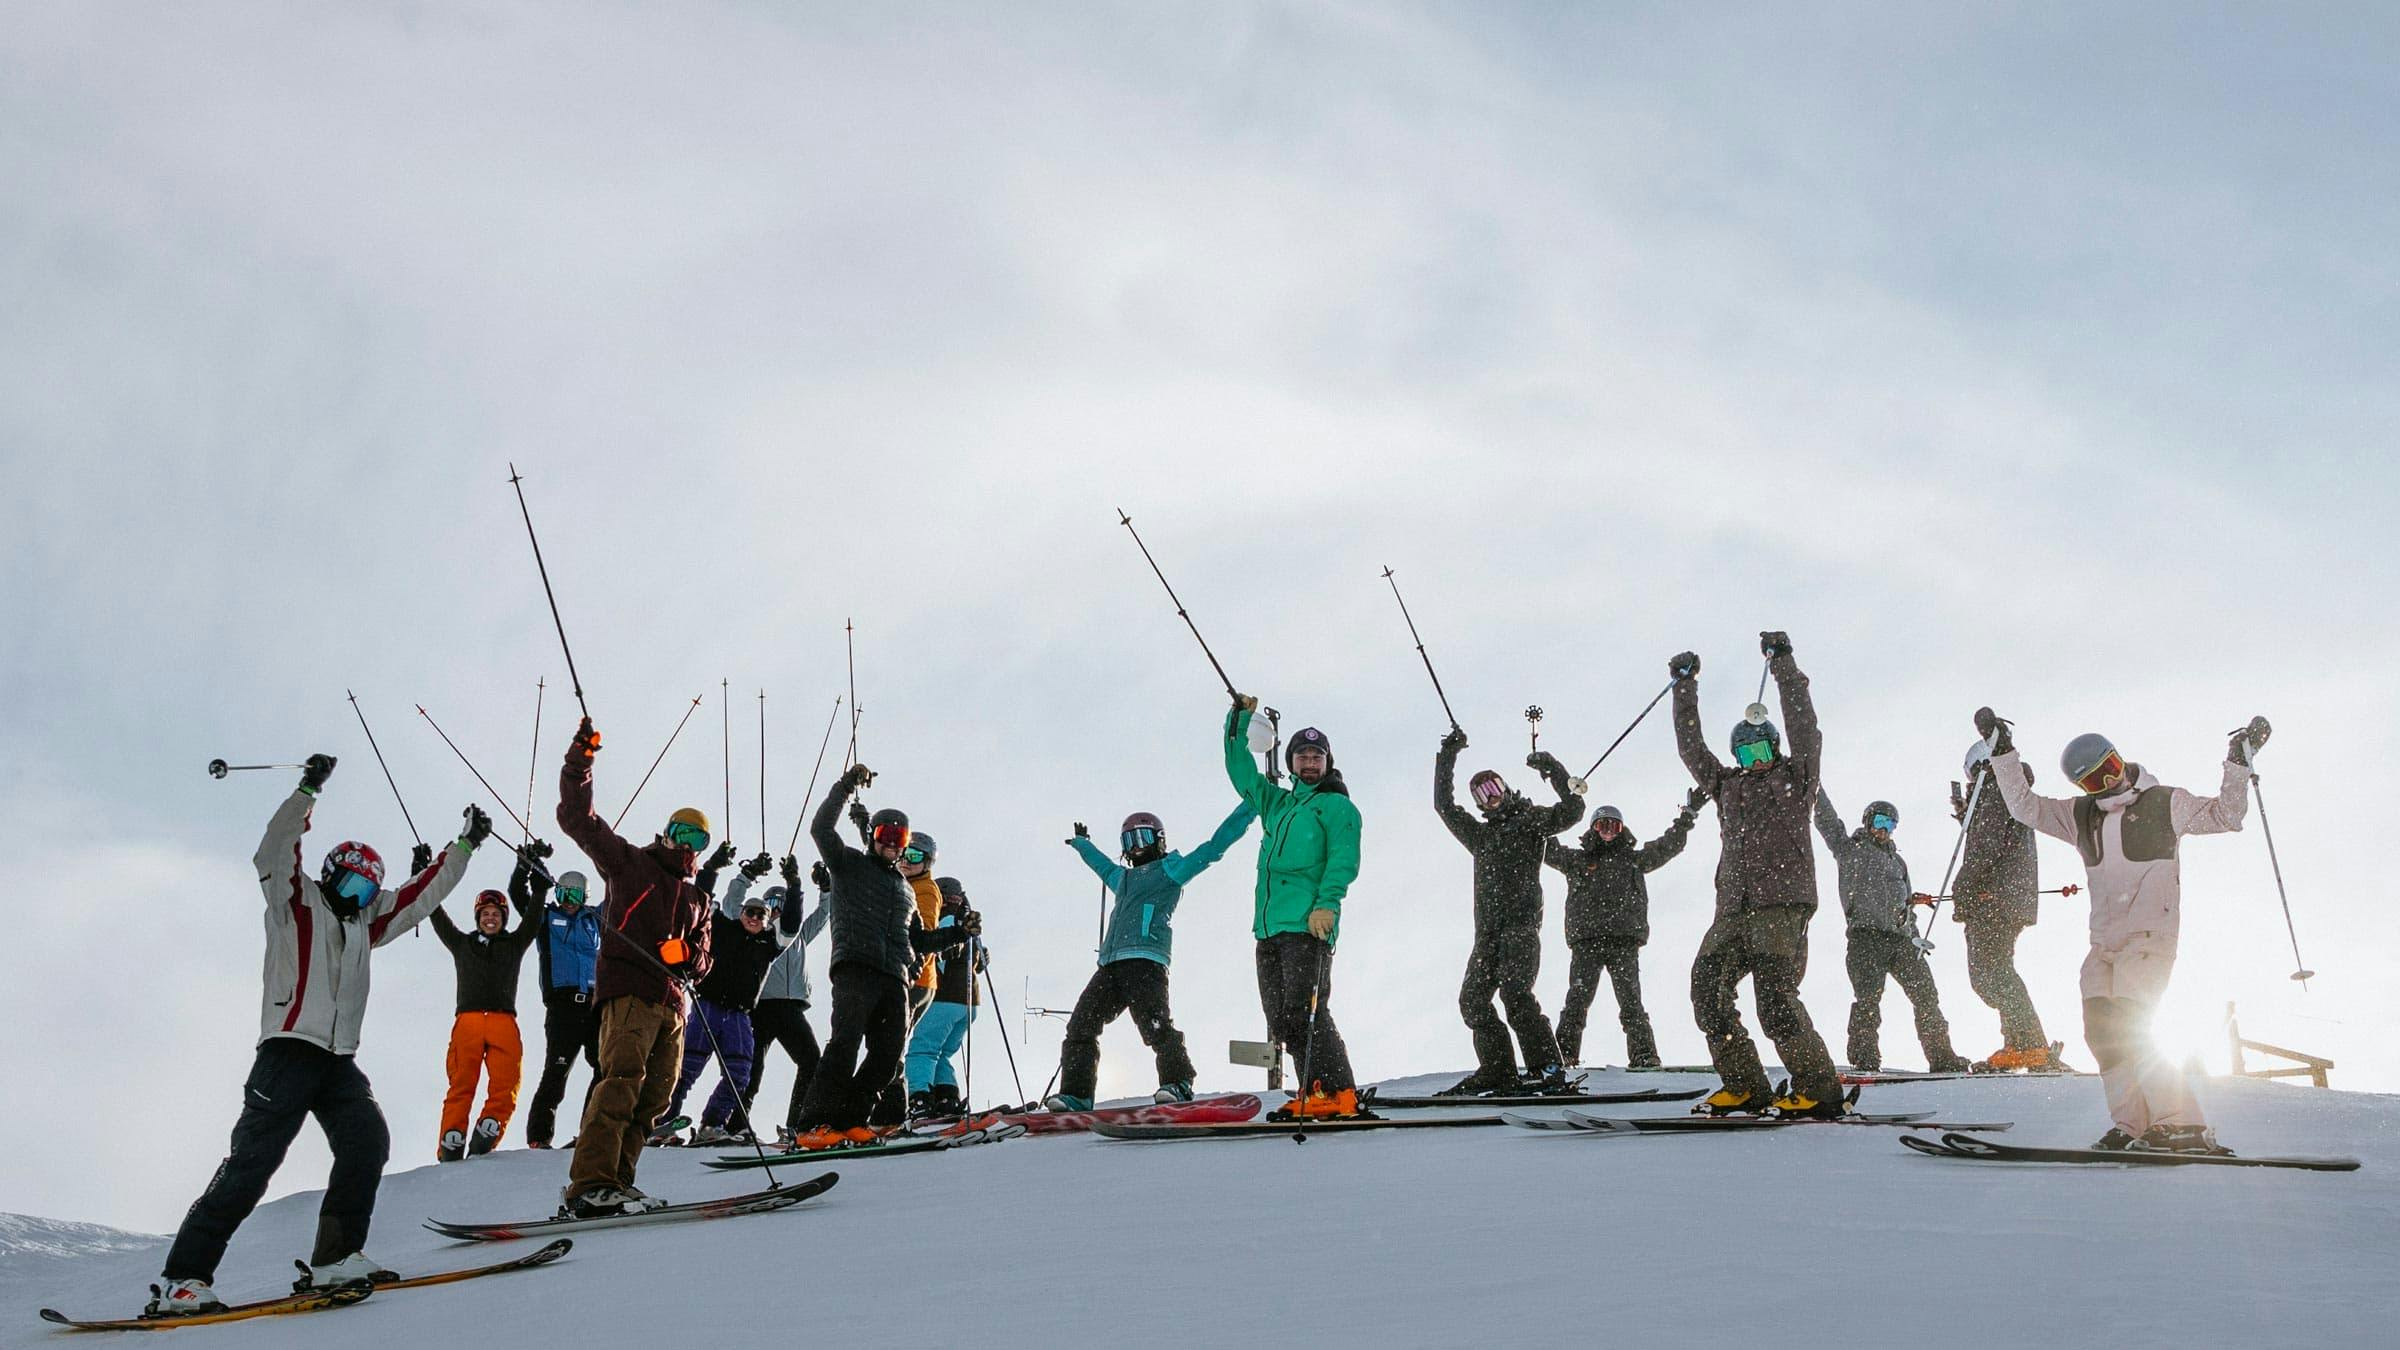 Group of skiers on the hill posing with their hands up for photo